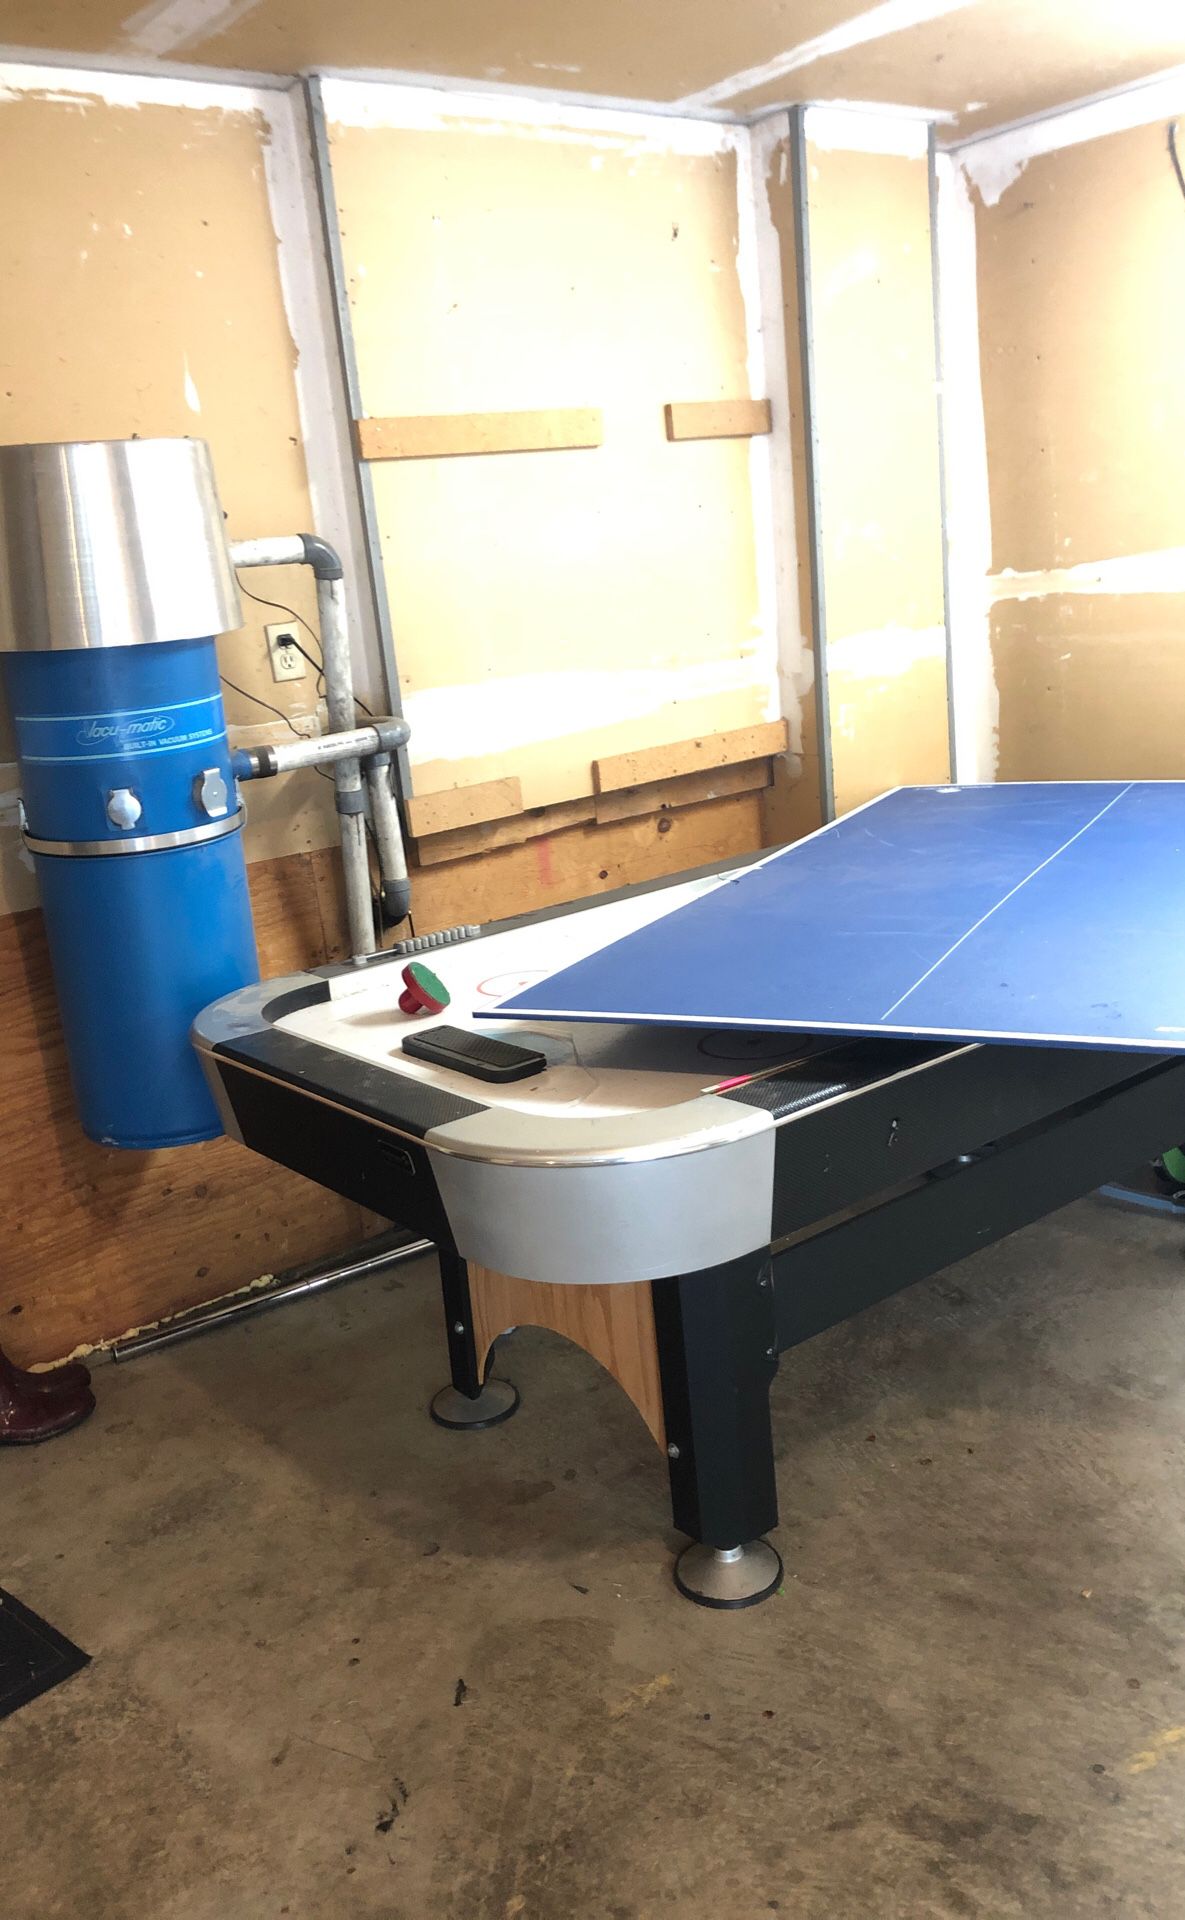 Air hockey table with ping pong table cover.